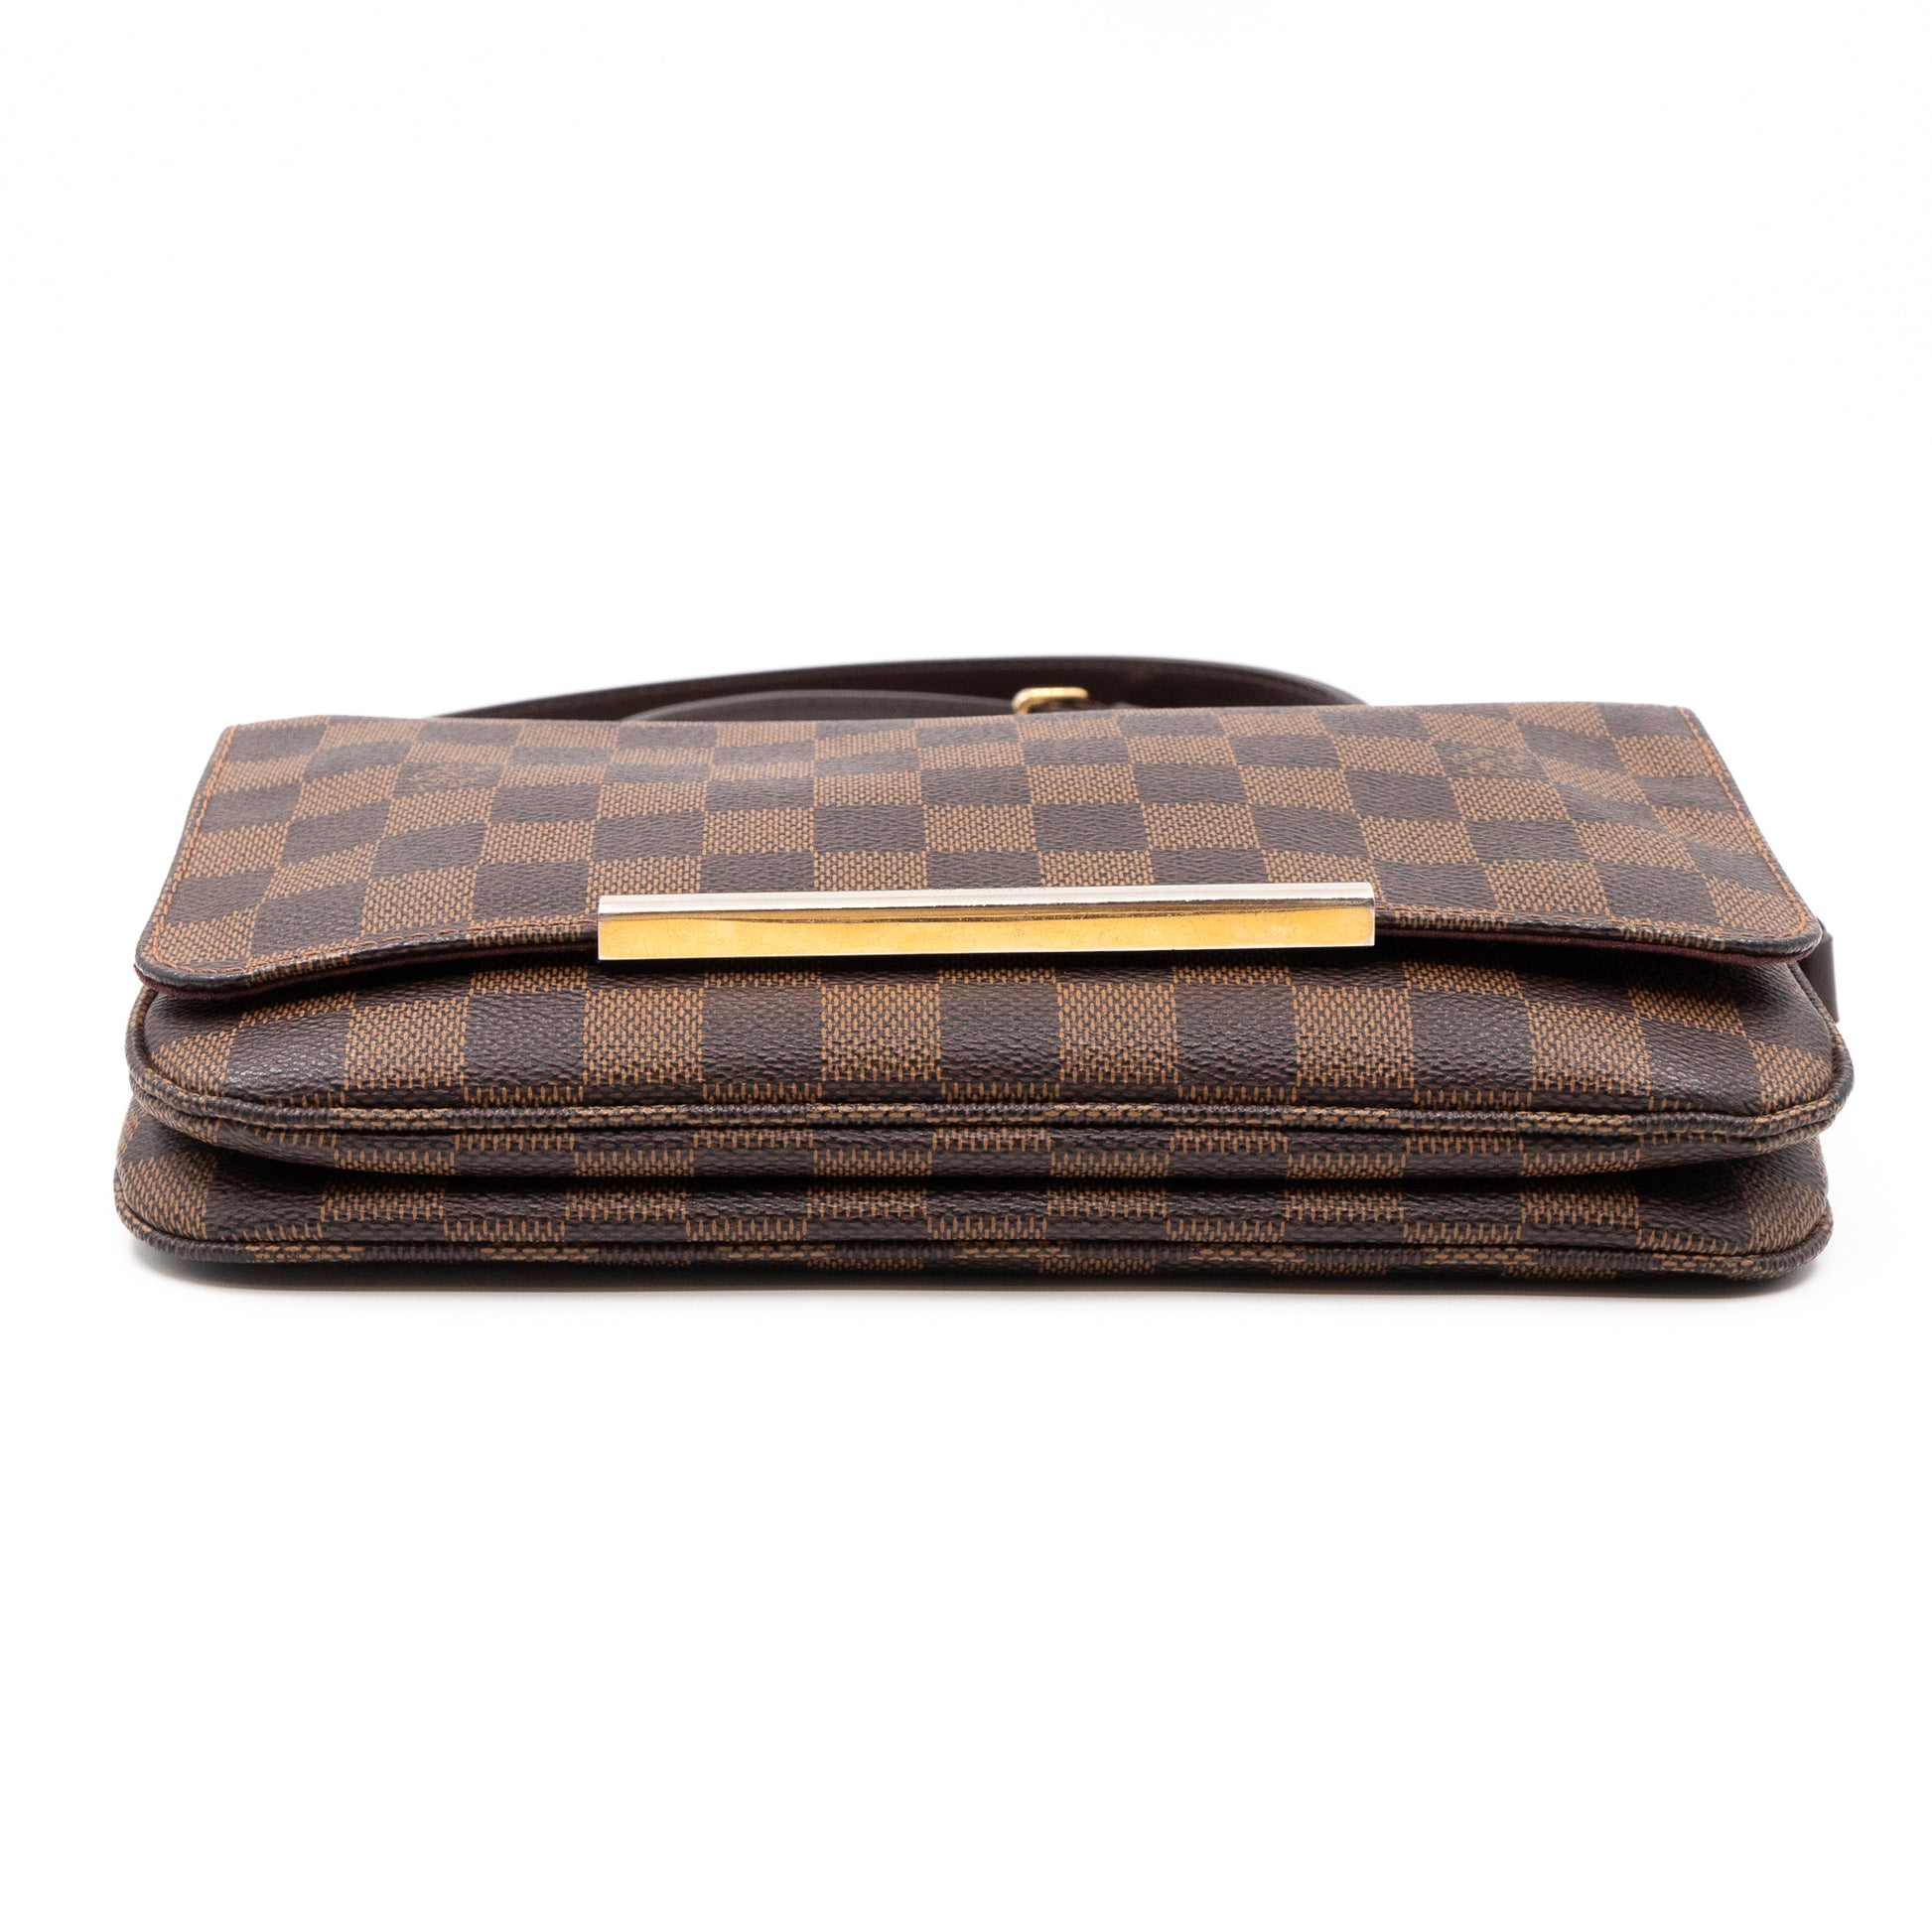 Louis+Vuitton+Hoxton+Crossbody+PM+Brown+Leather for sale online